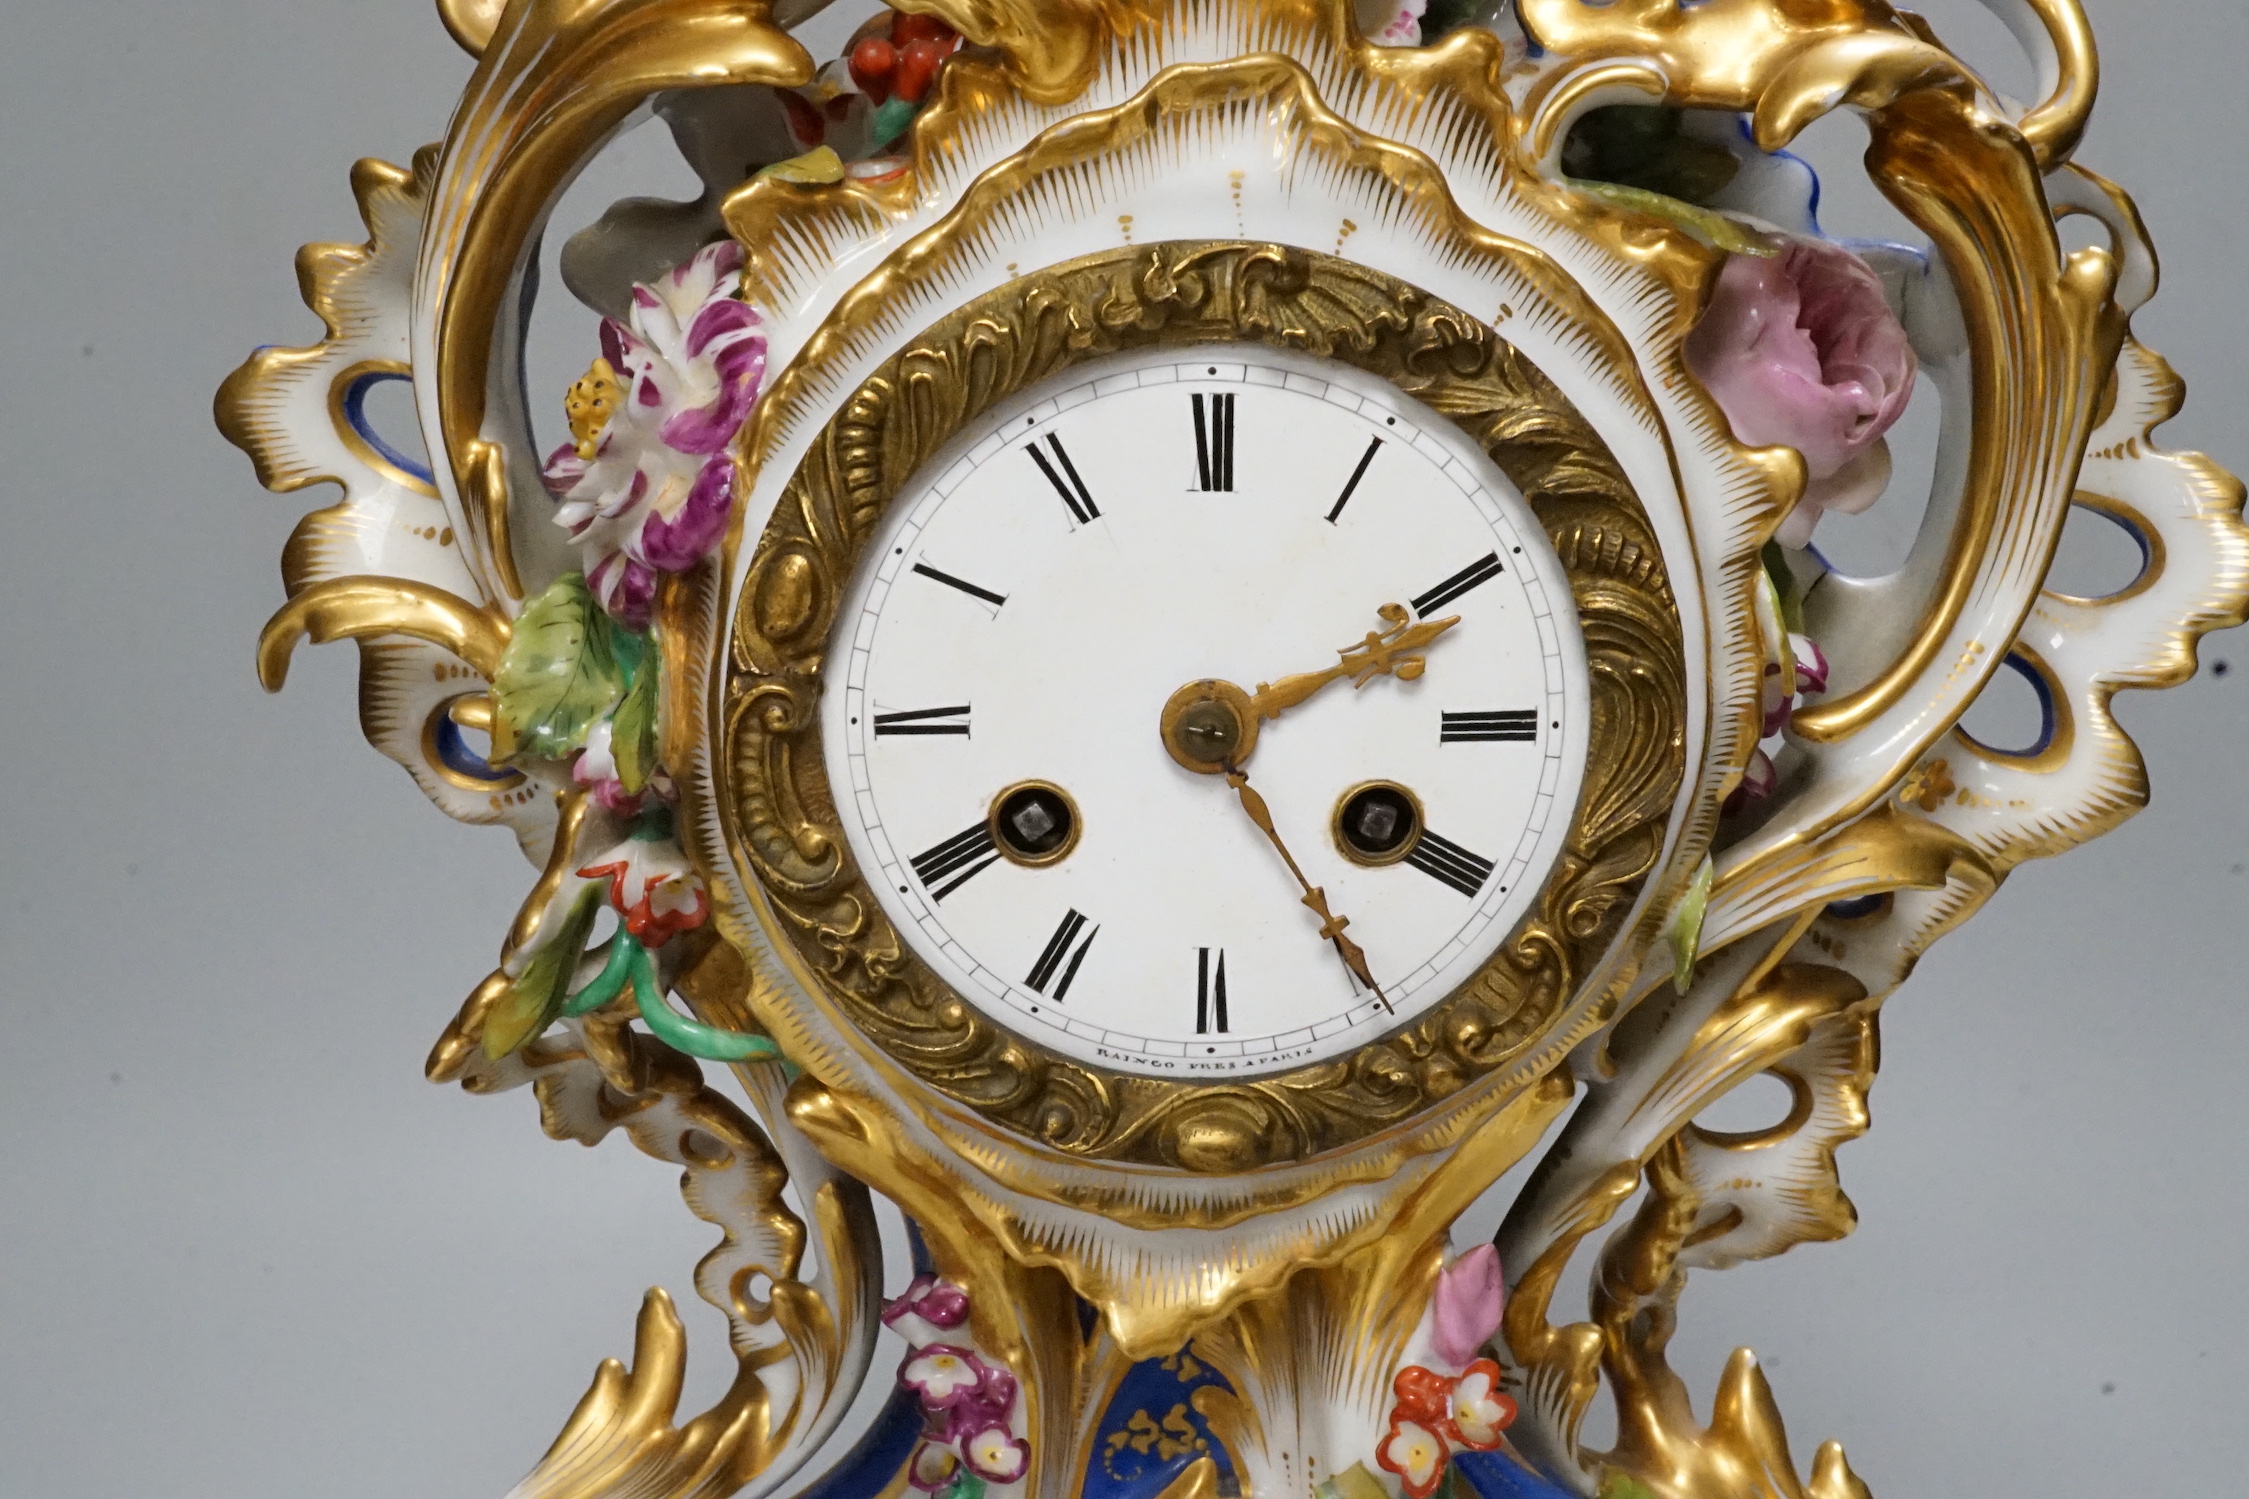 A mid 19th century French porcelain mantel clock and stand, probably Jacob Petit, 43cm tall